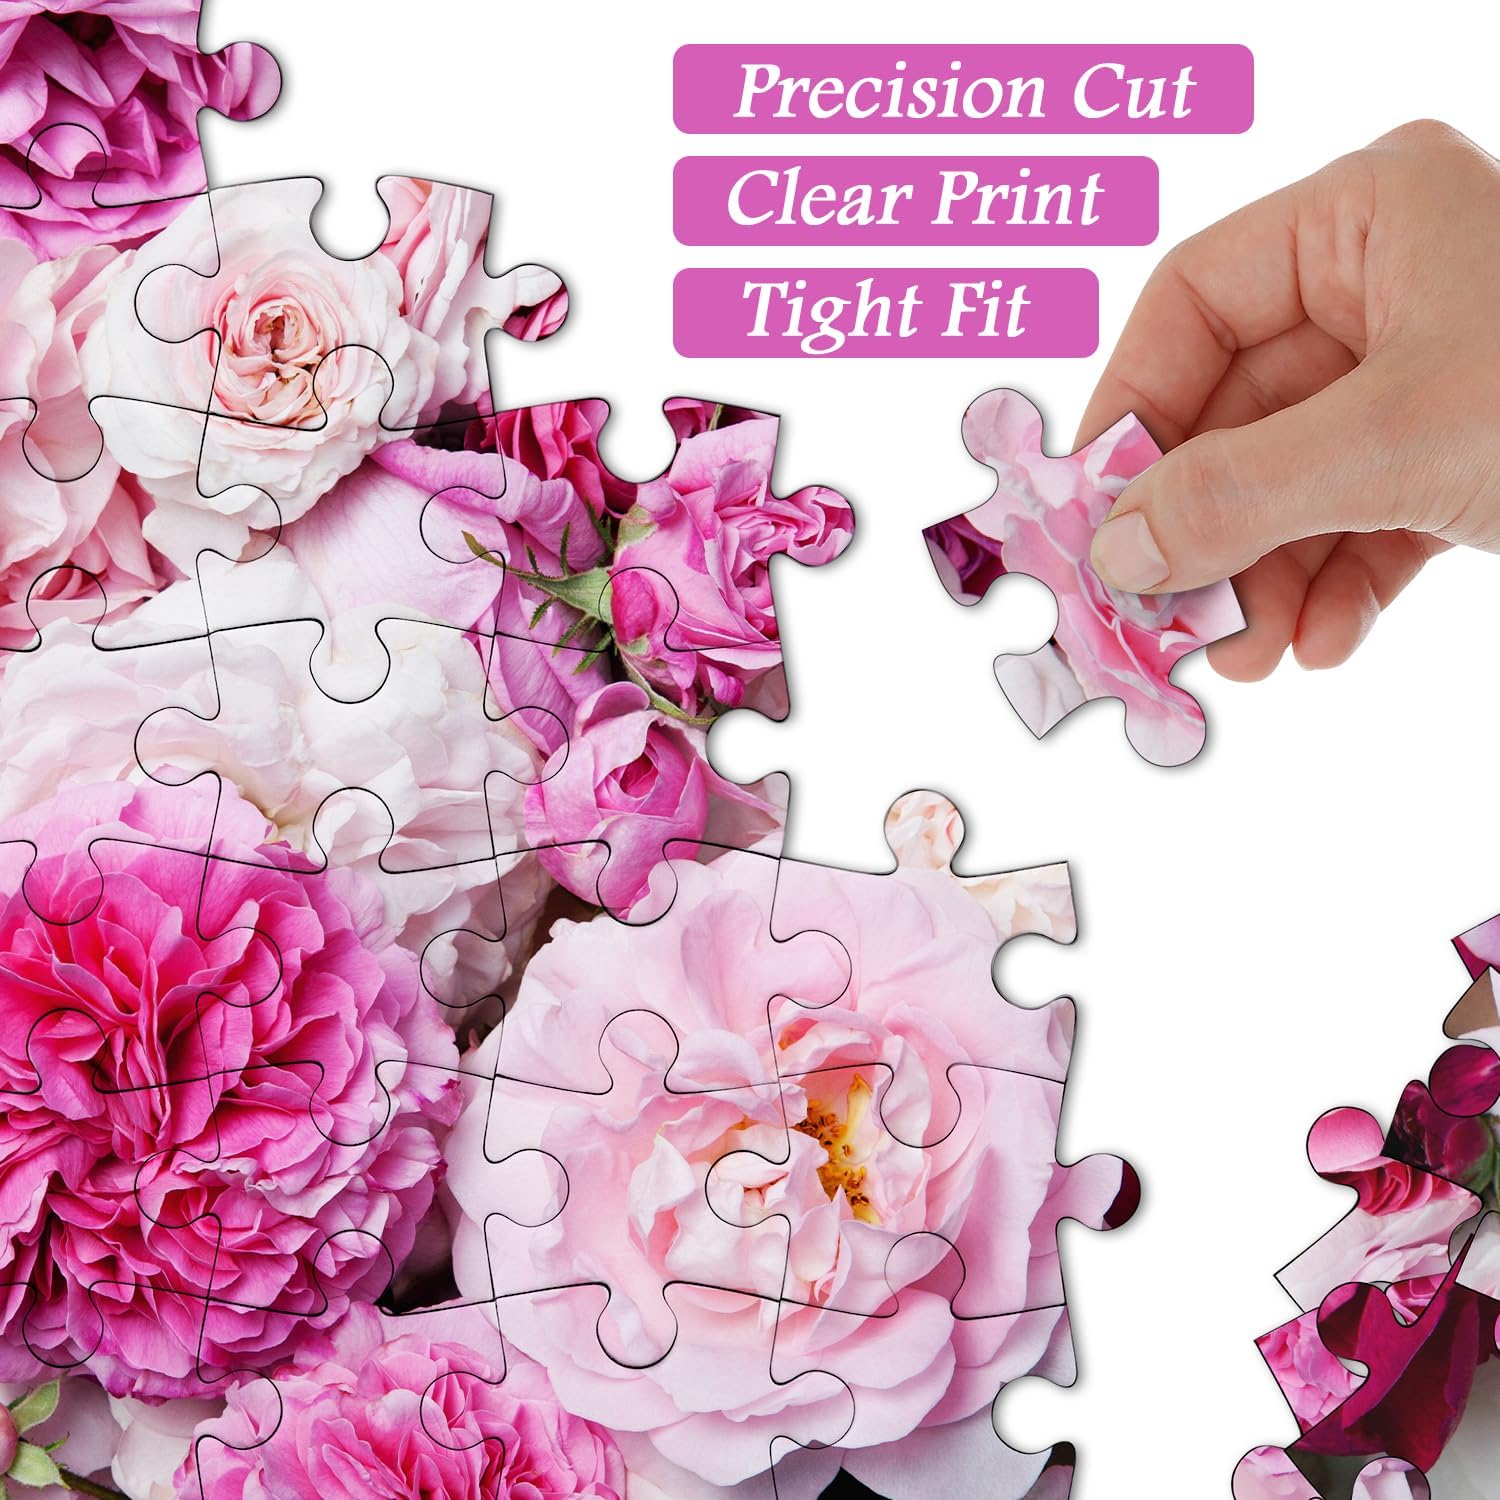 Pink Rose Flower Jigsaw Puzzle 1000 Pieces